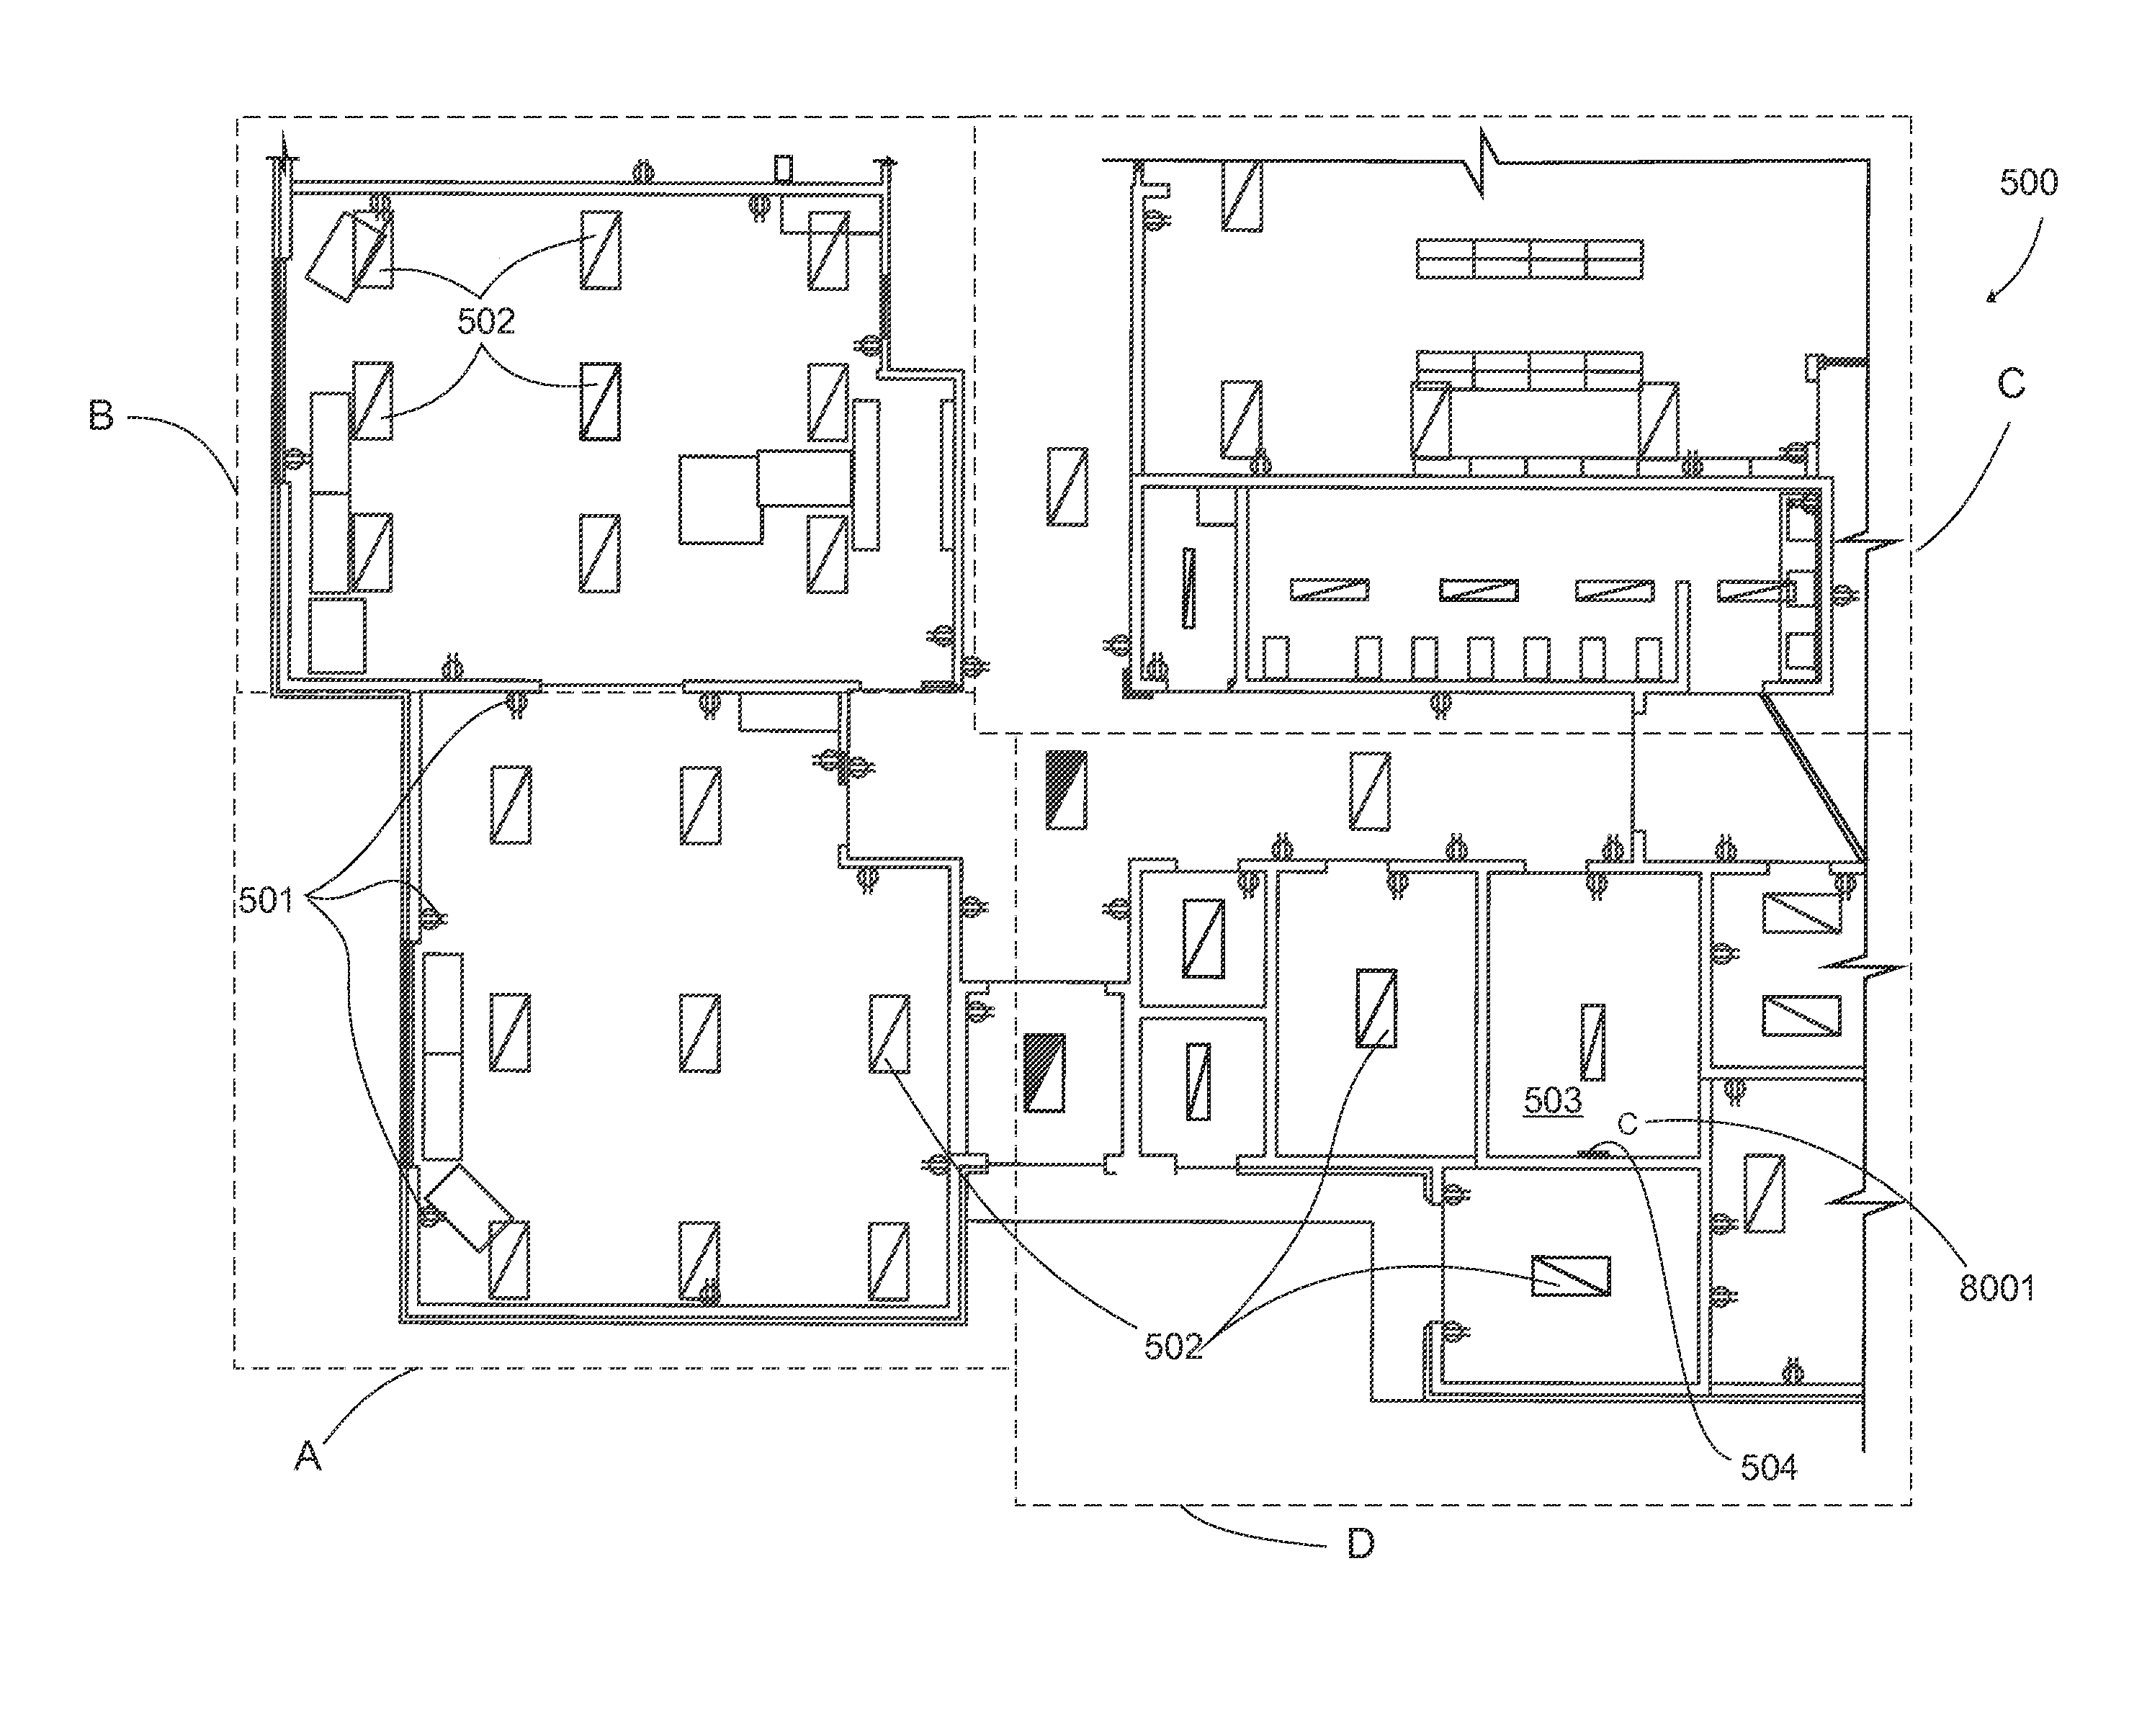 System and process for automated circuiting and branch circuit wiring